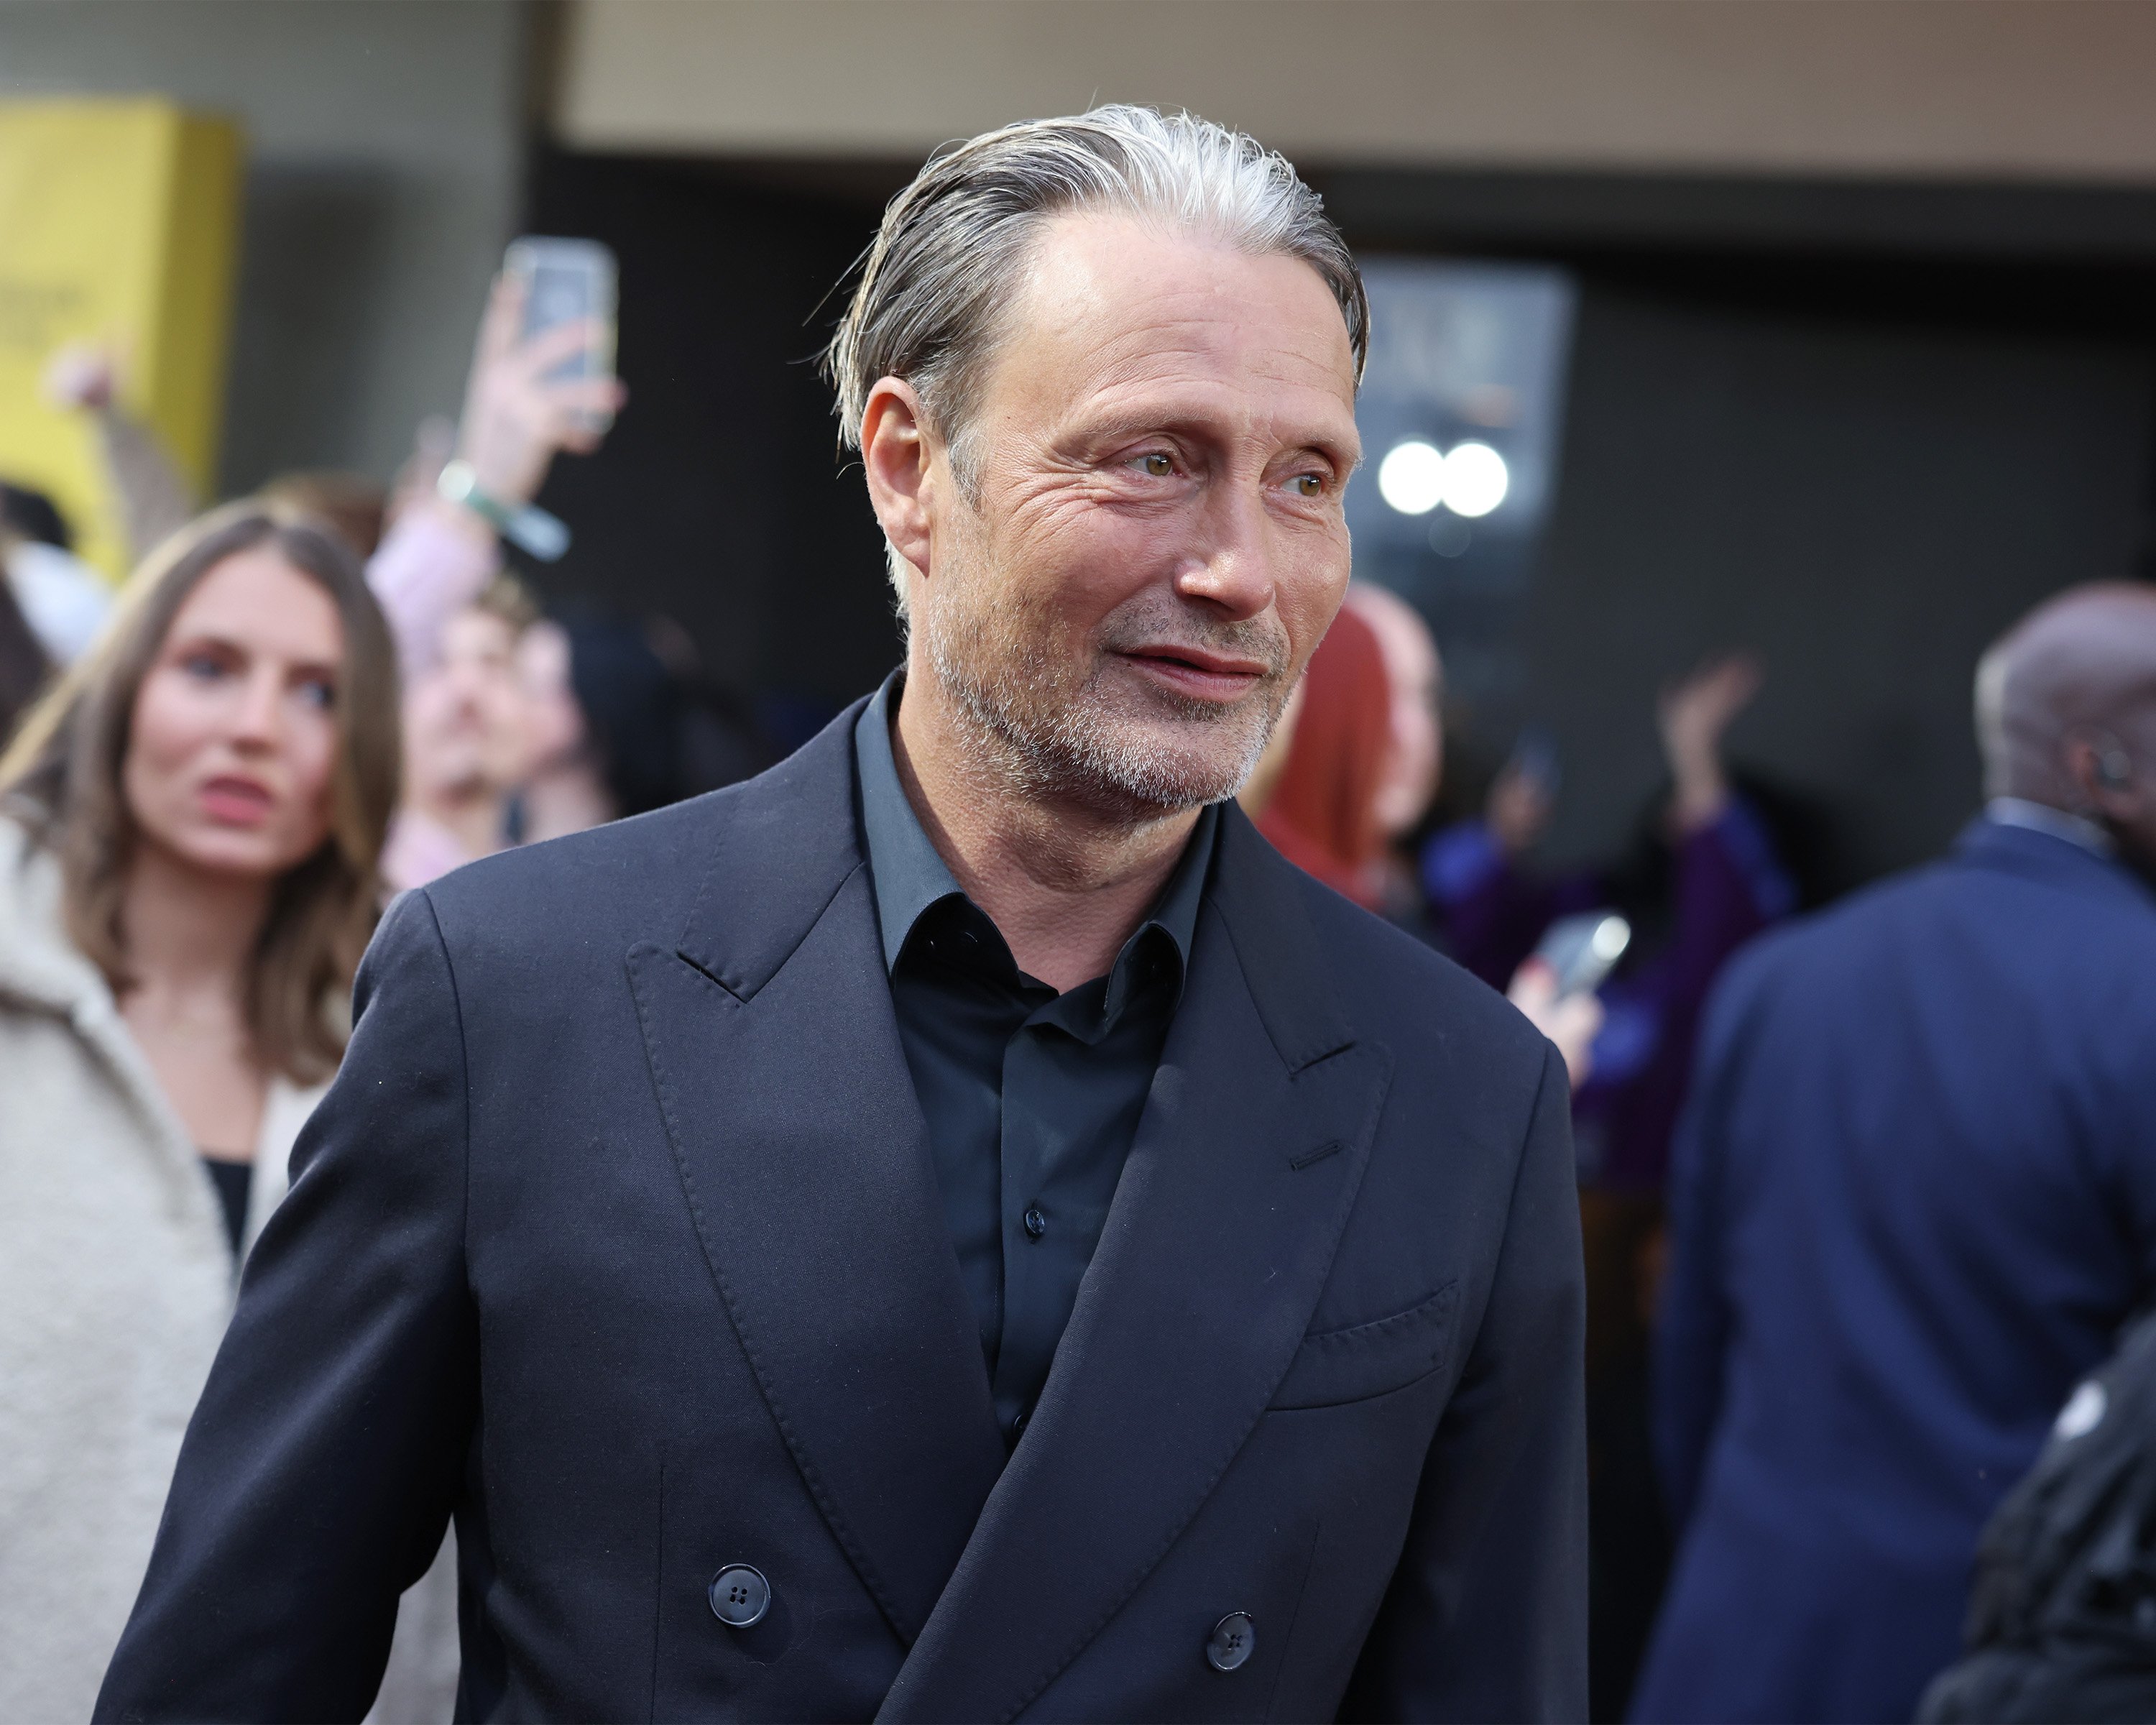 Mads Mikkelsen, star of Indiana Jones 5, attends the premiere of Fantastic Beasts: The Secrets of Dumbledore